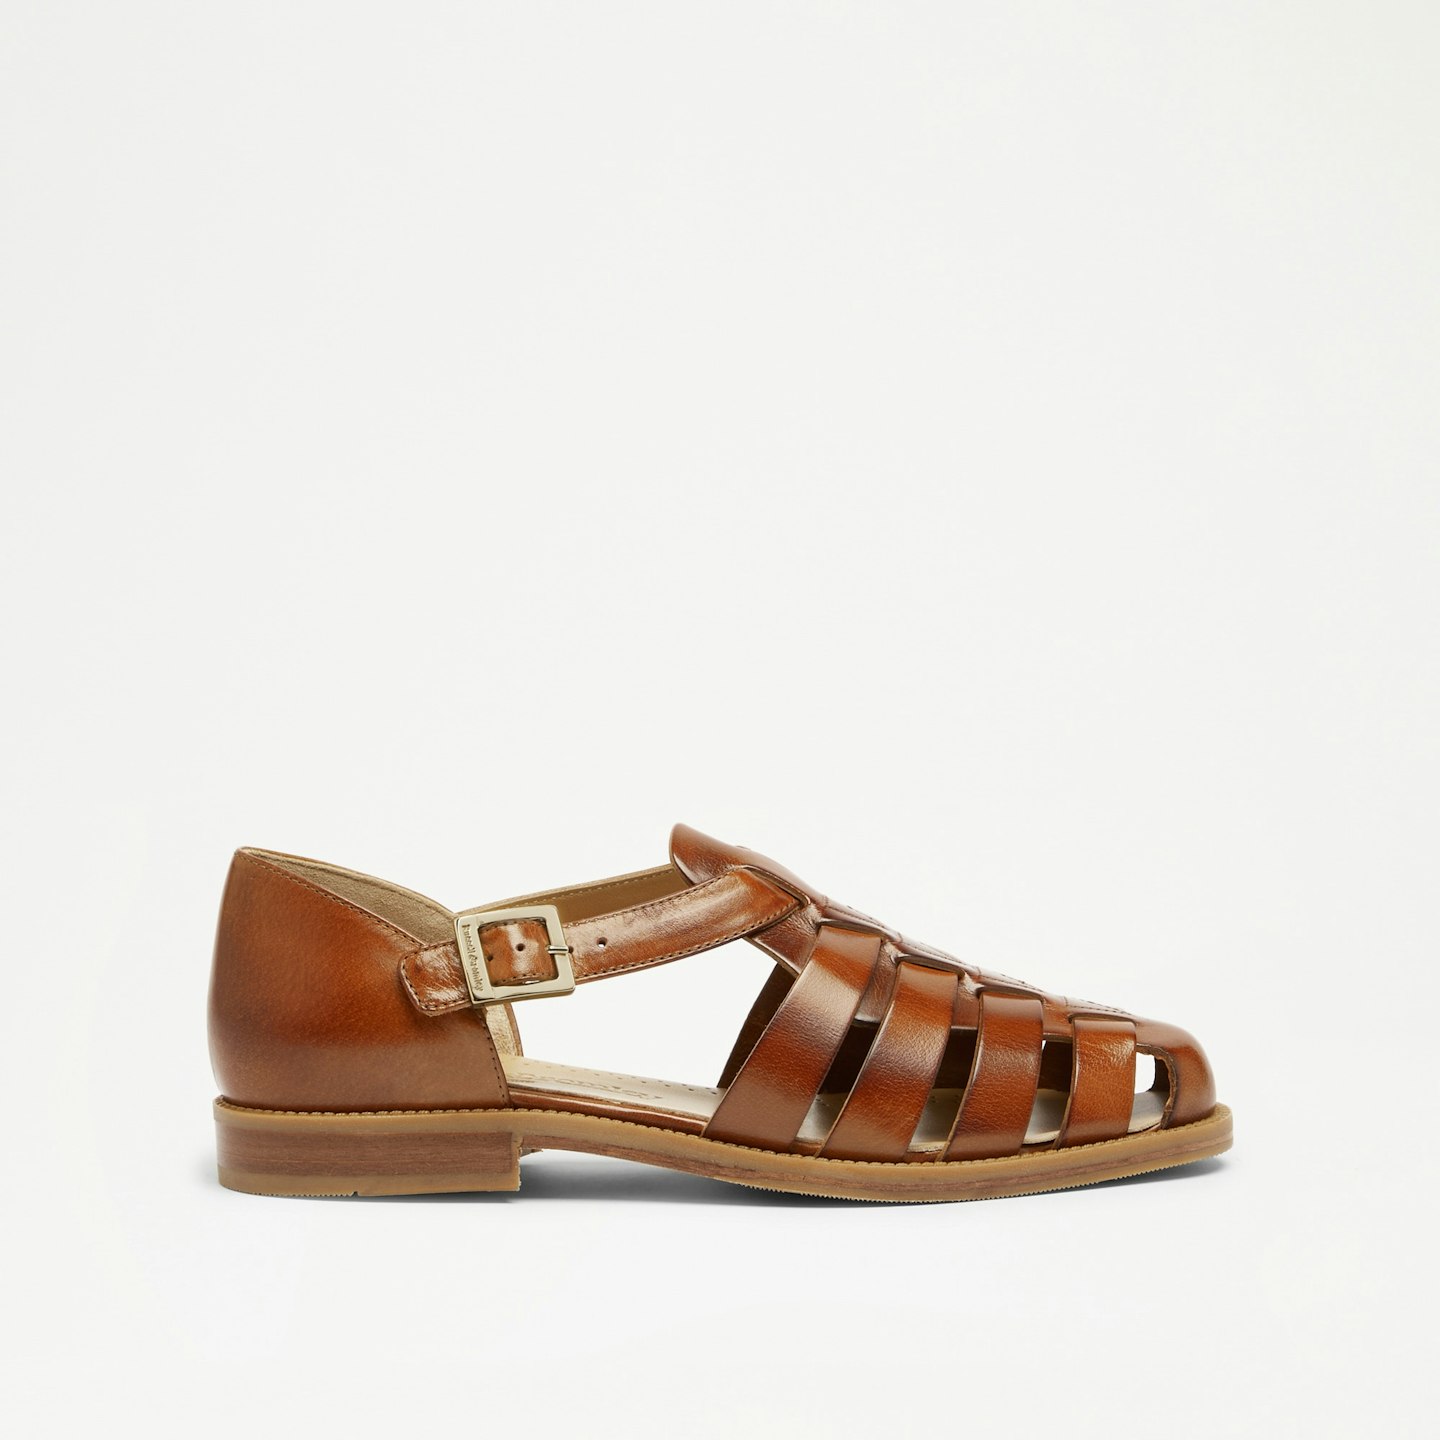 Russell & Bromley, Siracuse Fisherman's Sandals